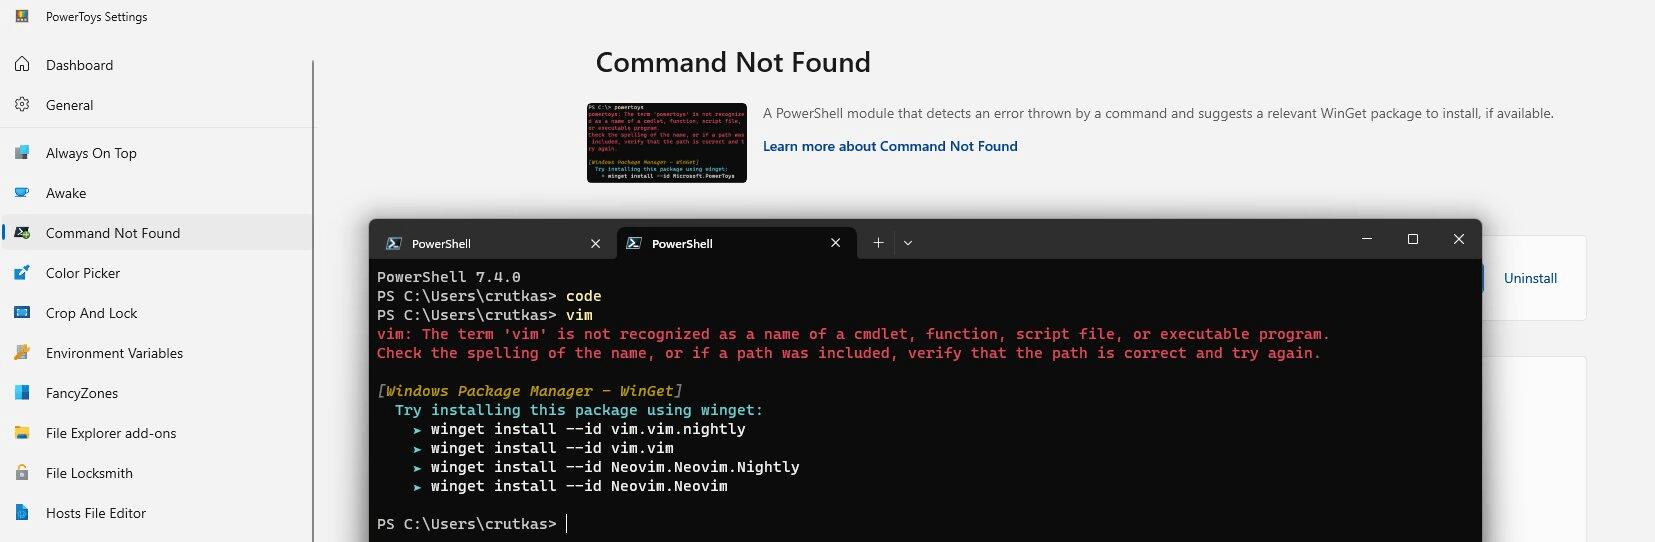 PowerToys Command Not Found Tool